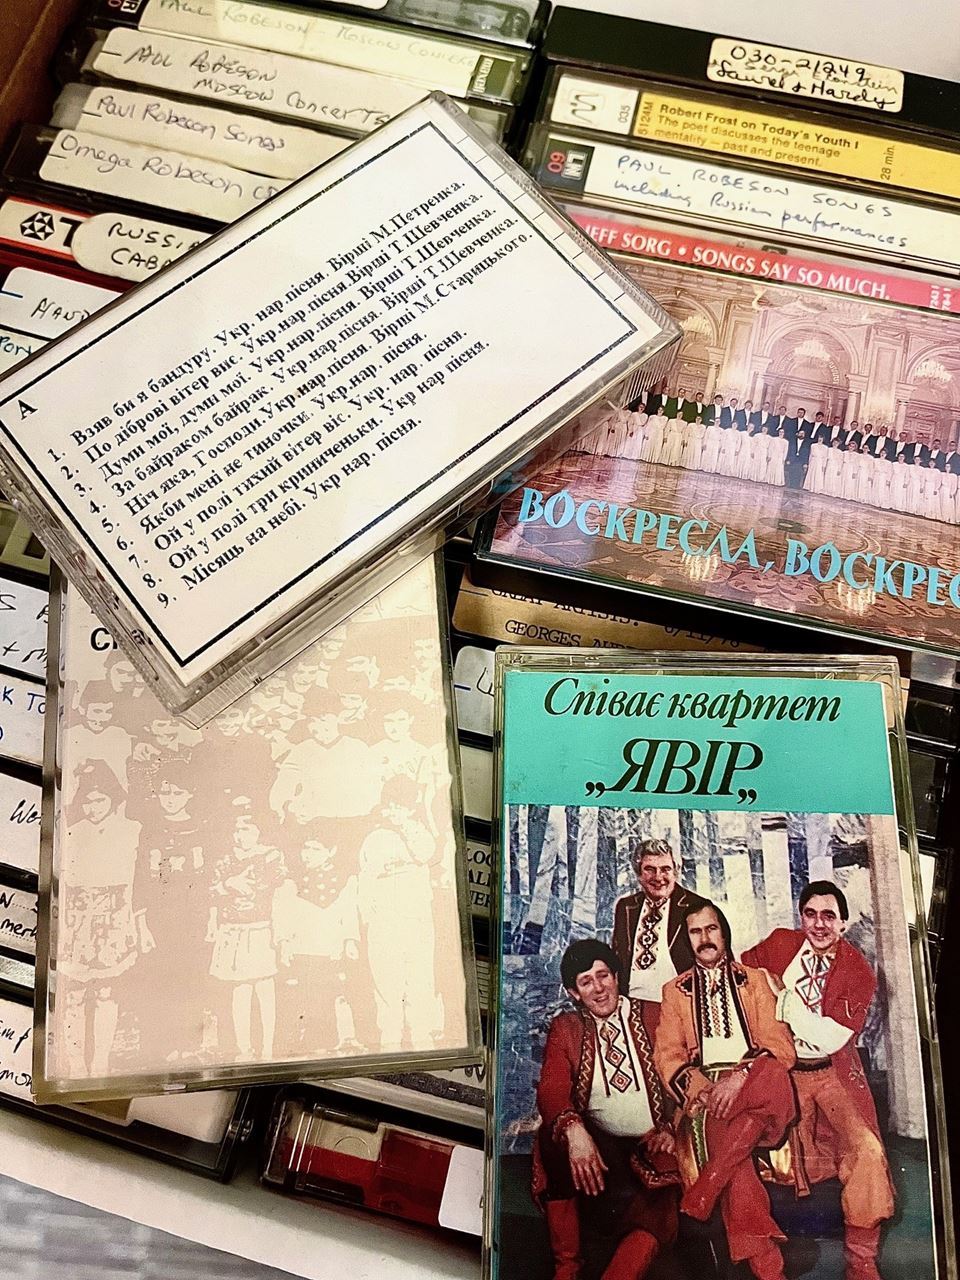 Audio cassette tapes with labels written in a Slavic language.